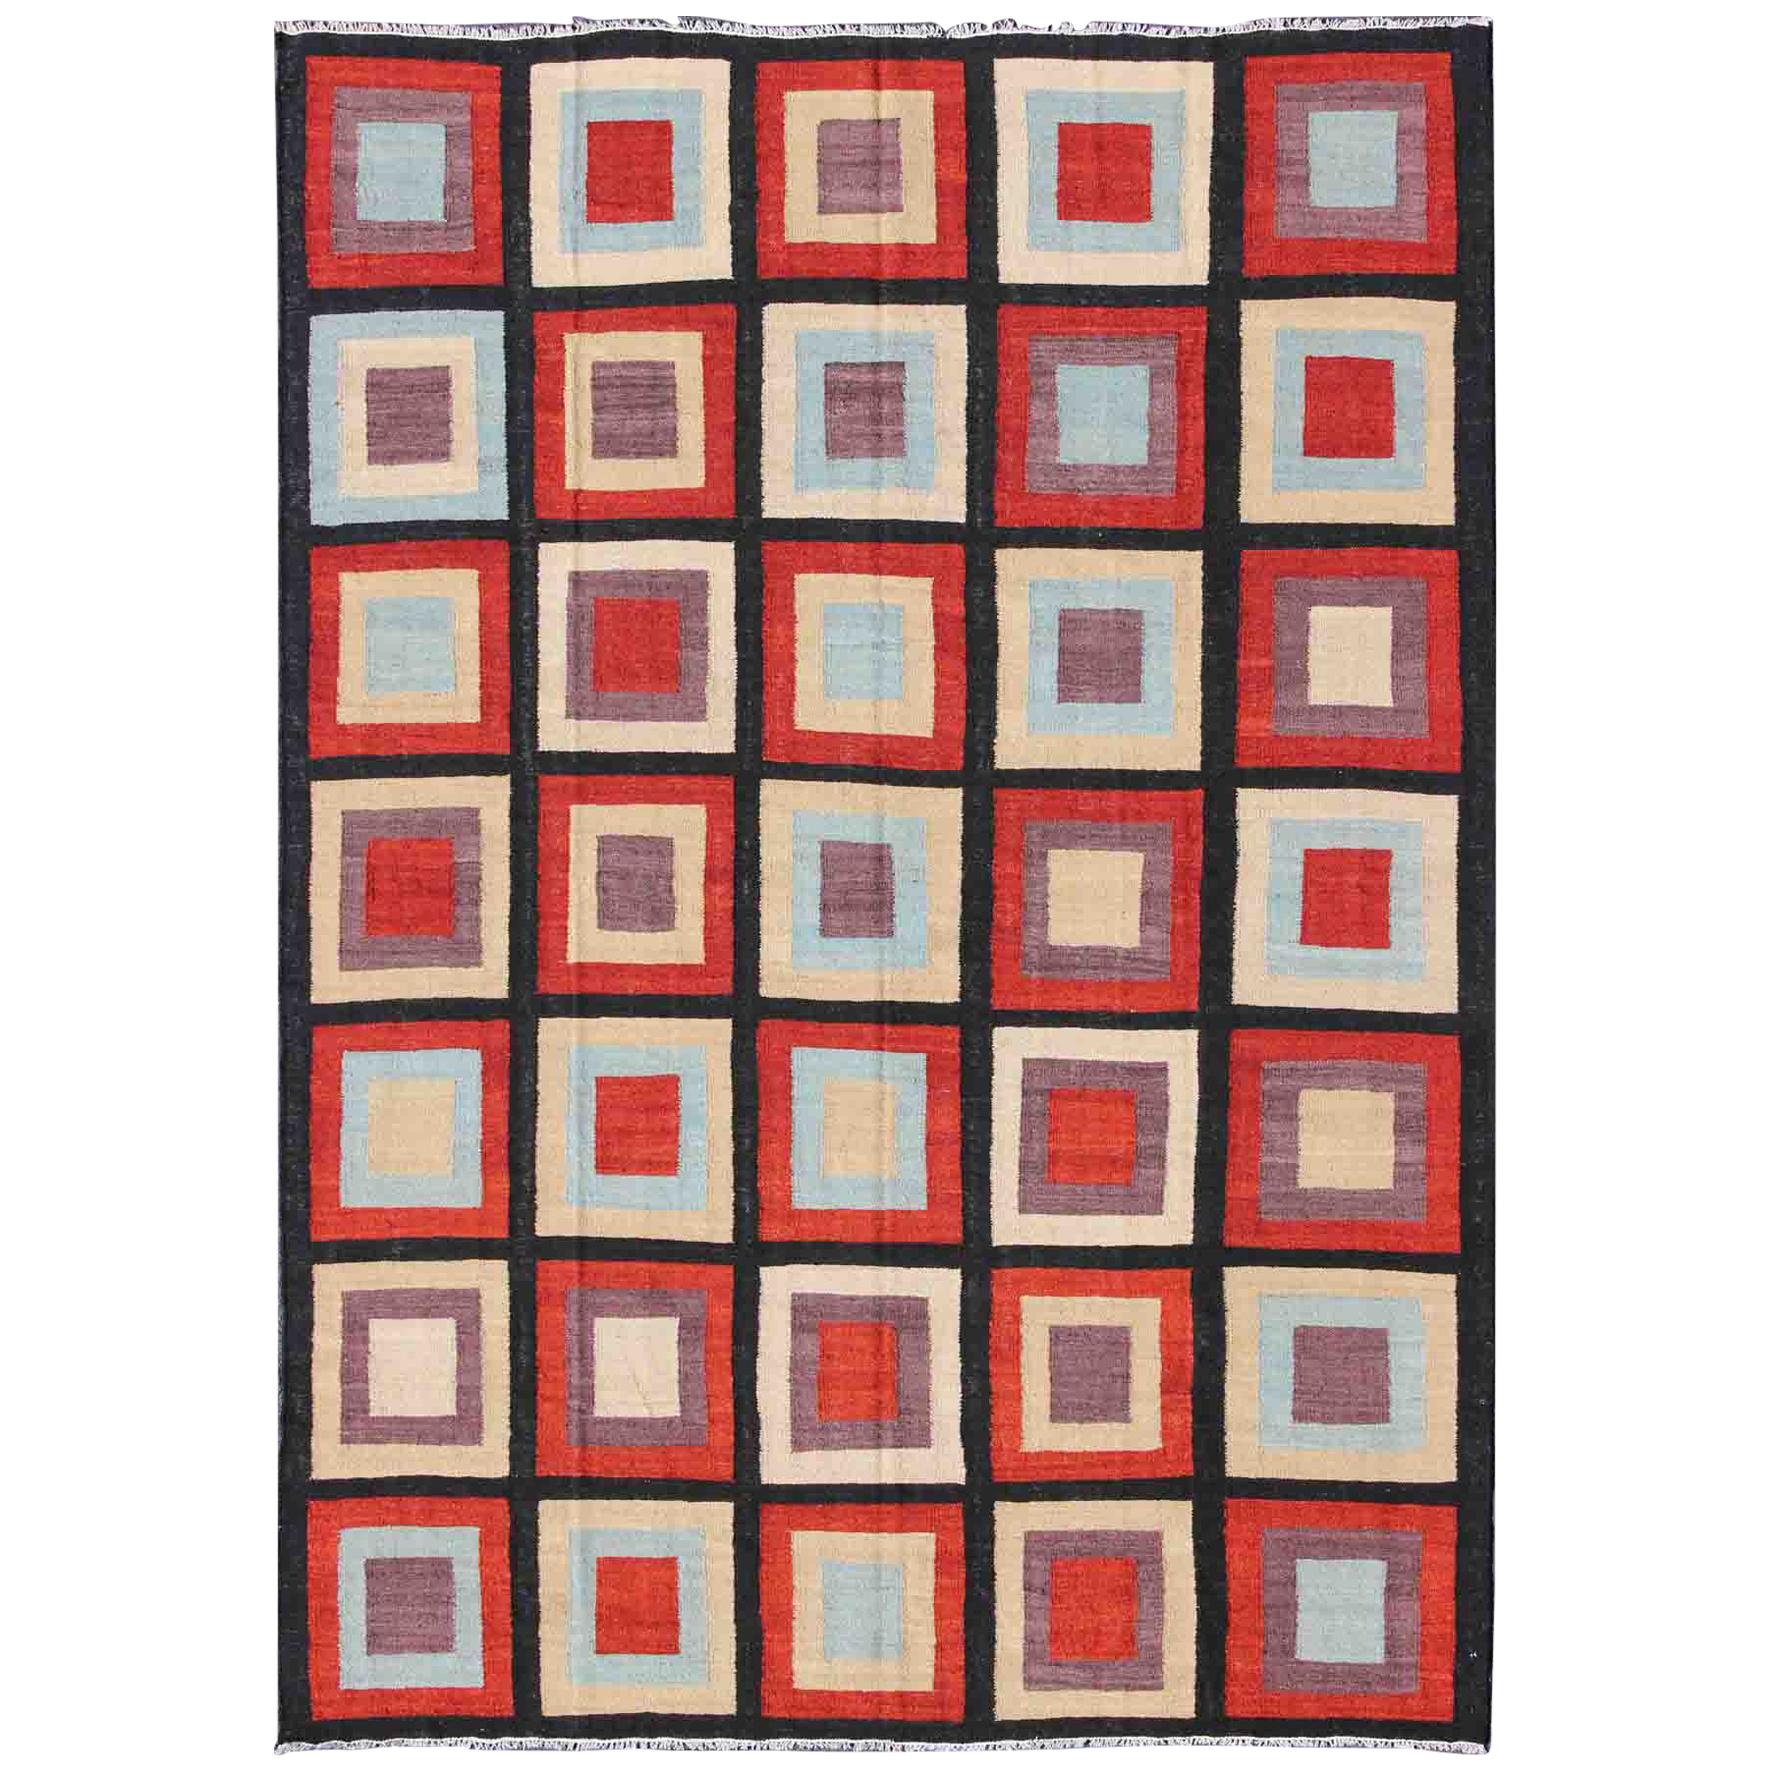 Large Modern Kilim Rug with Squared Design in Red, Blue, Black, Cream, Purple